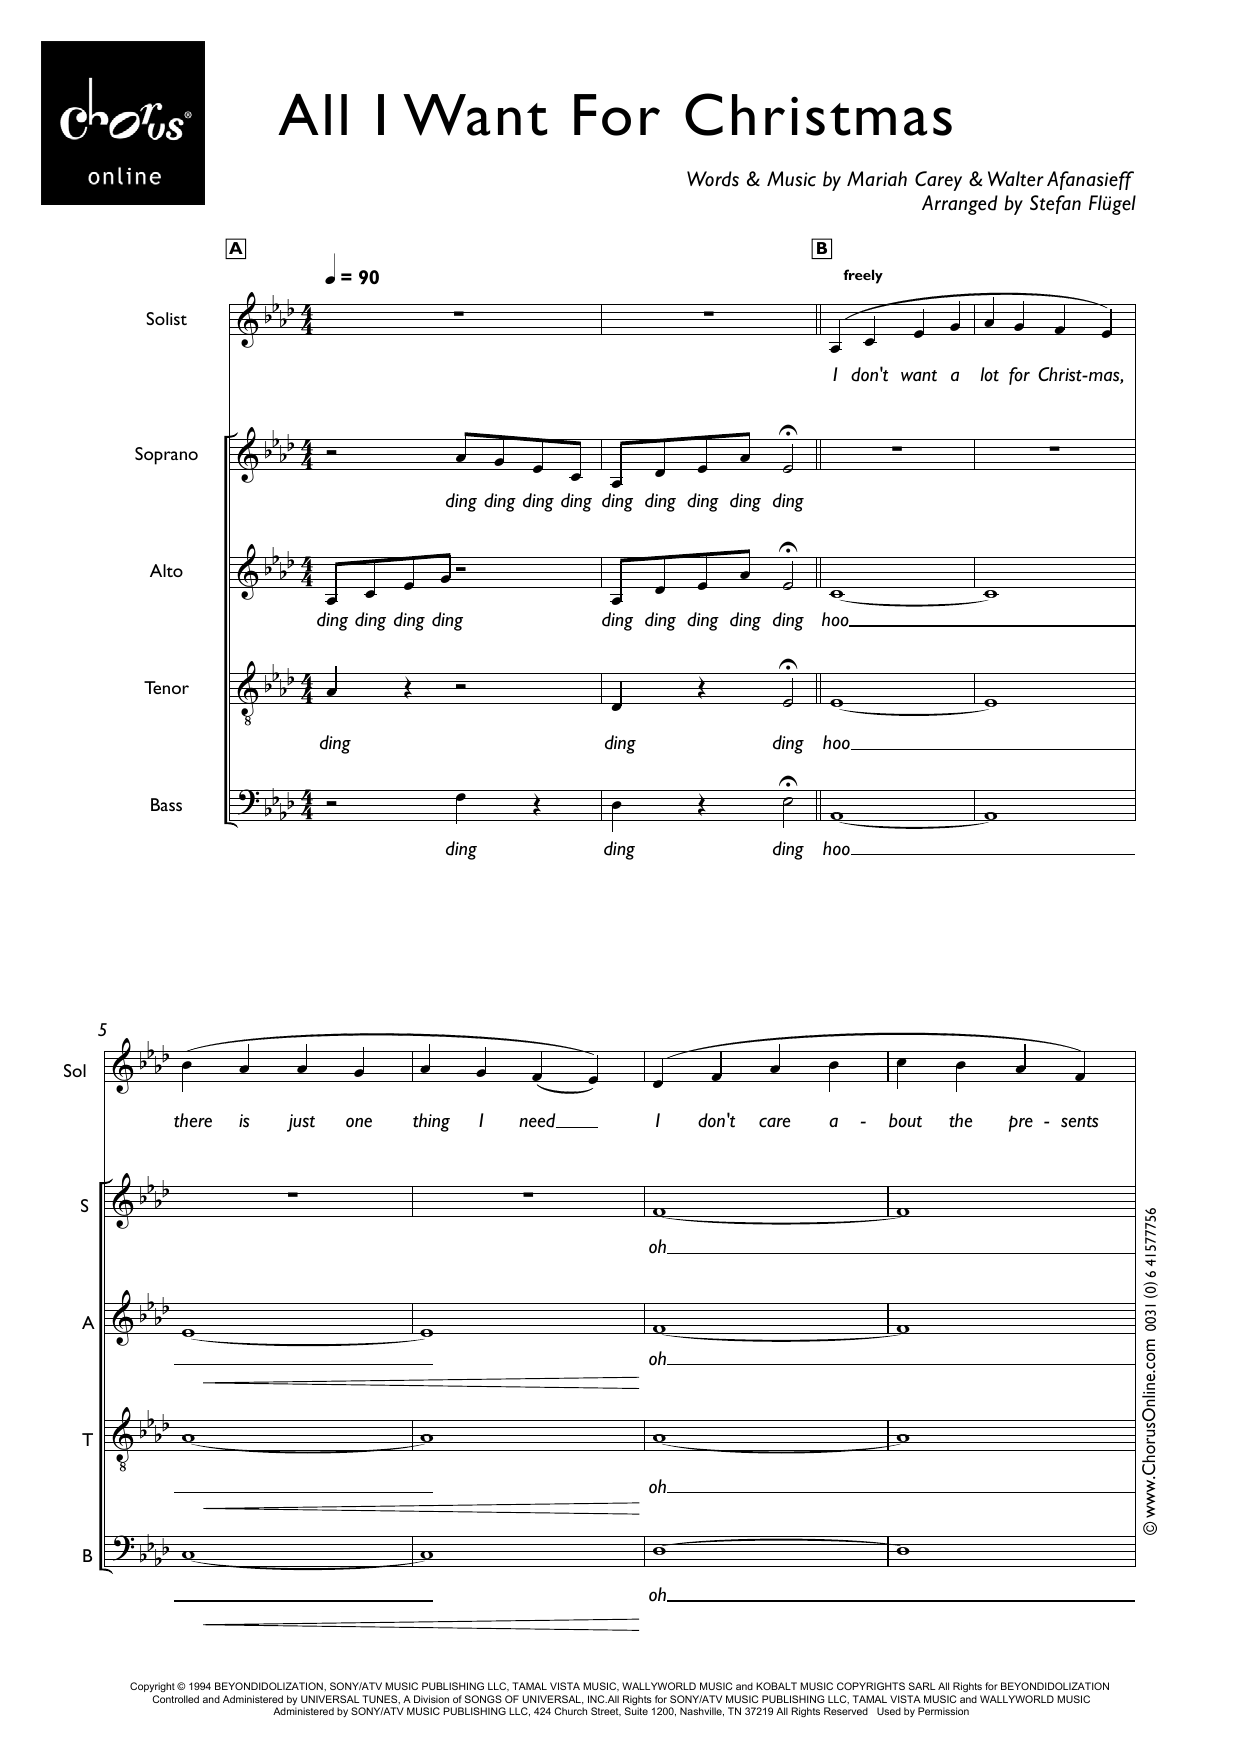 Mariah Carey All I Want For Christmas Is You (arr. Stefan Flügel) sheet music notes printable PDF score